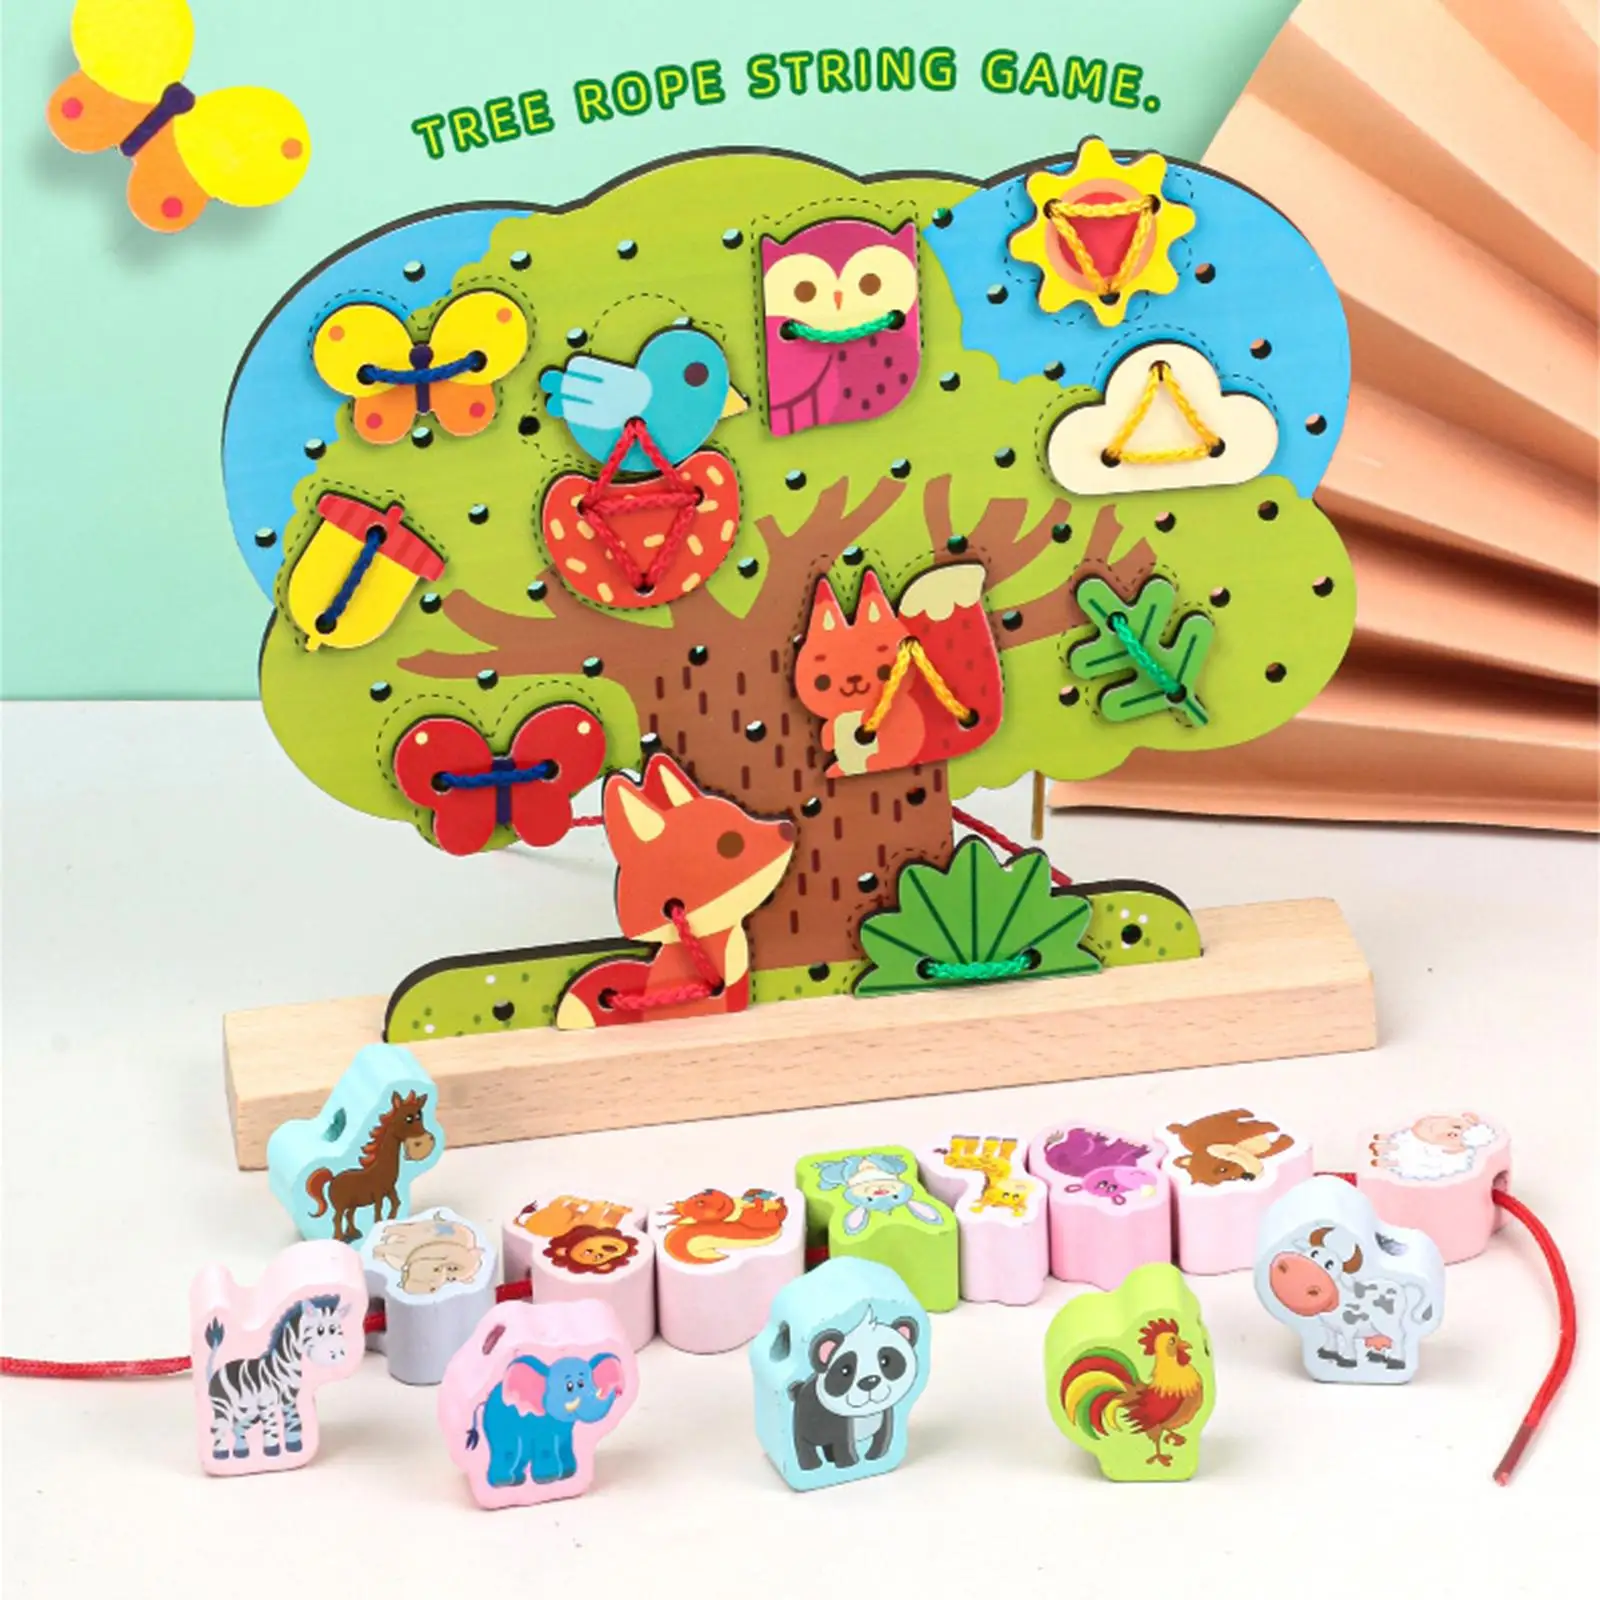 Wooden   Skill Preschool Activity Threading Toys, for  Toddlers Age 3 4 5  Birthday Gifts